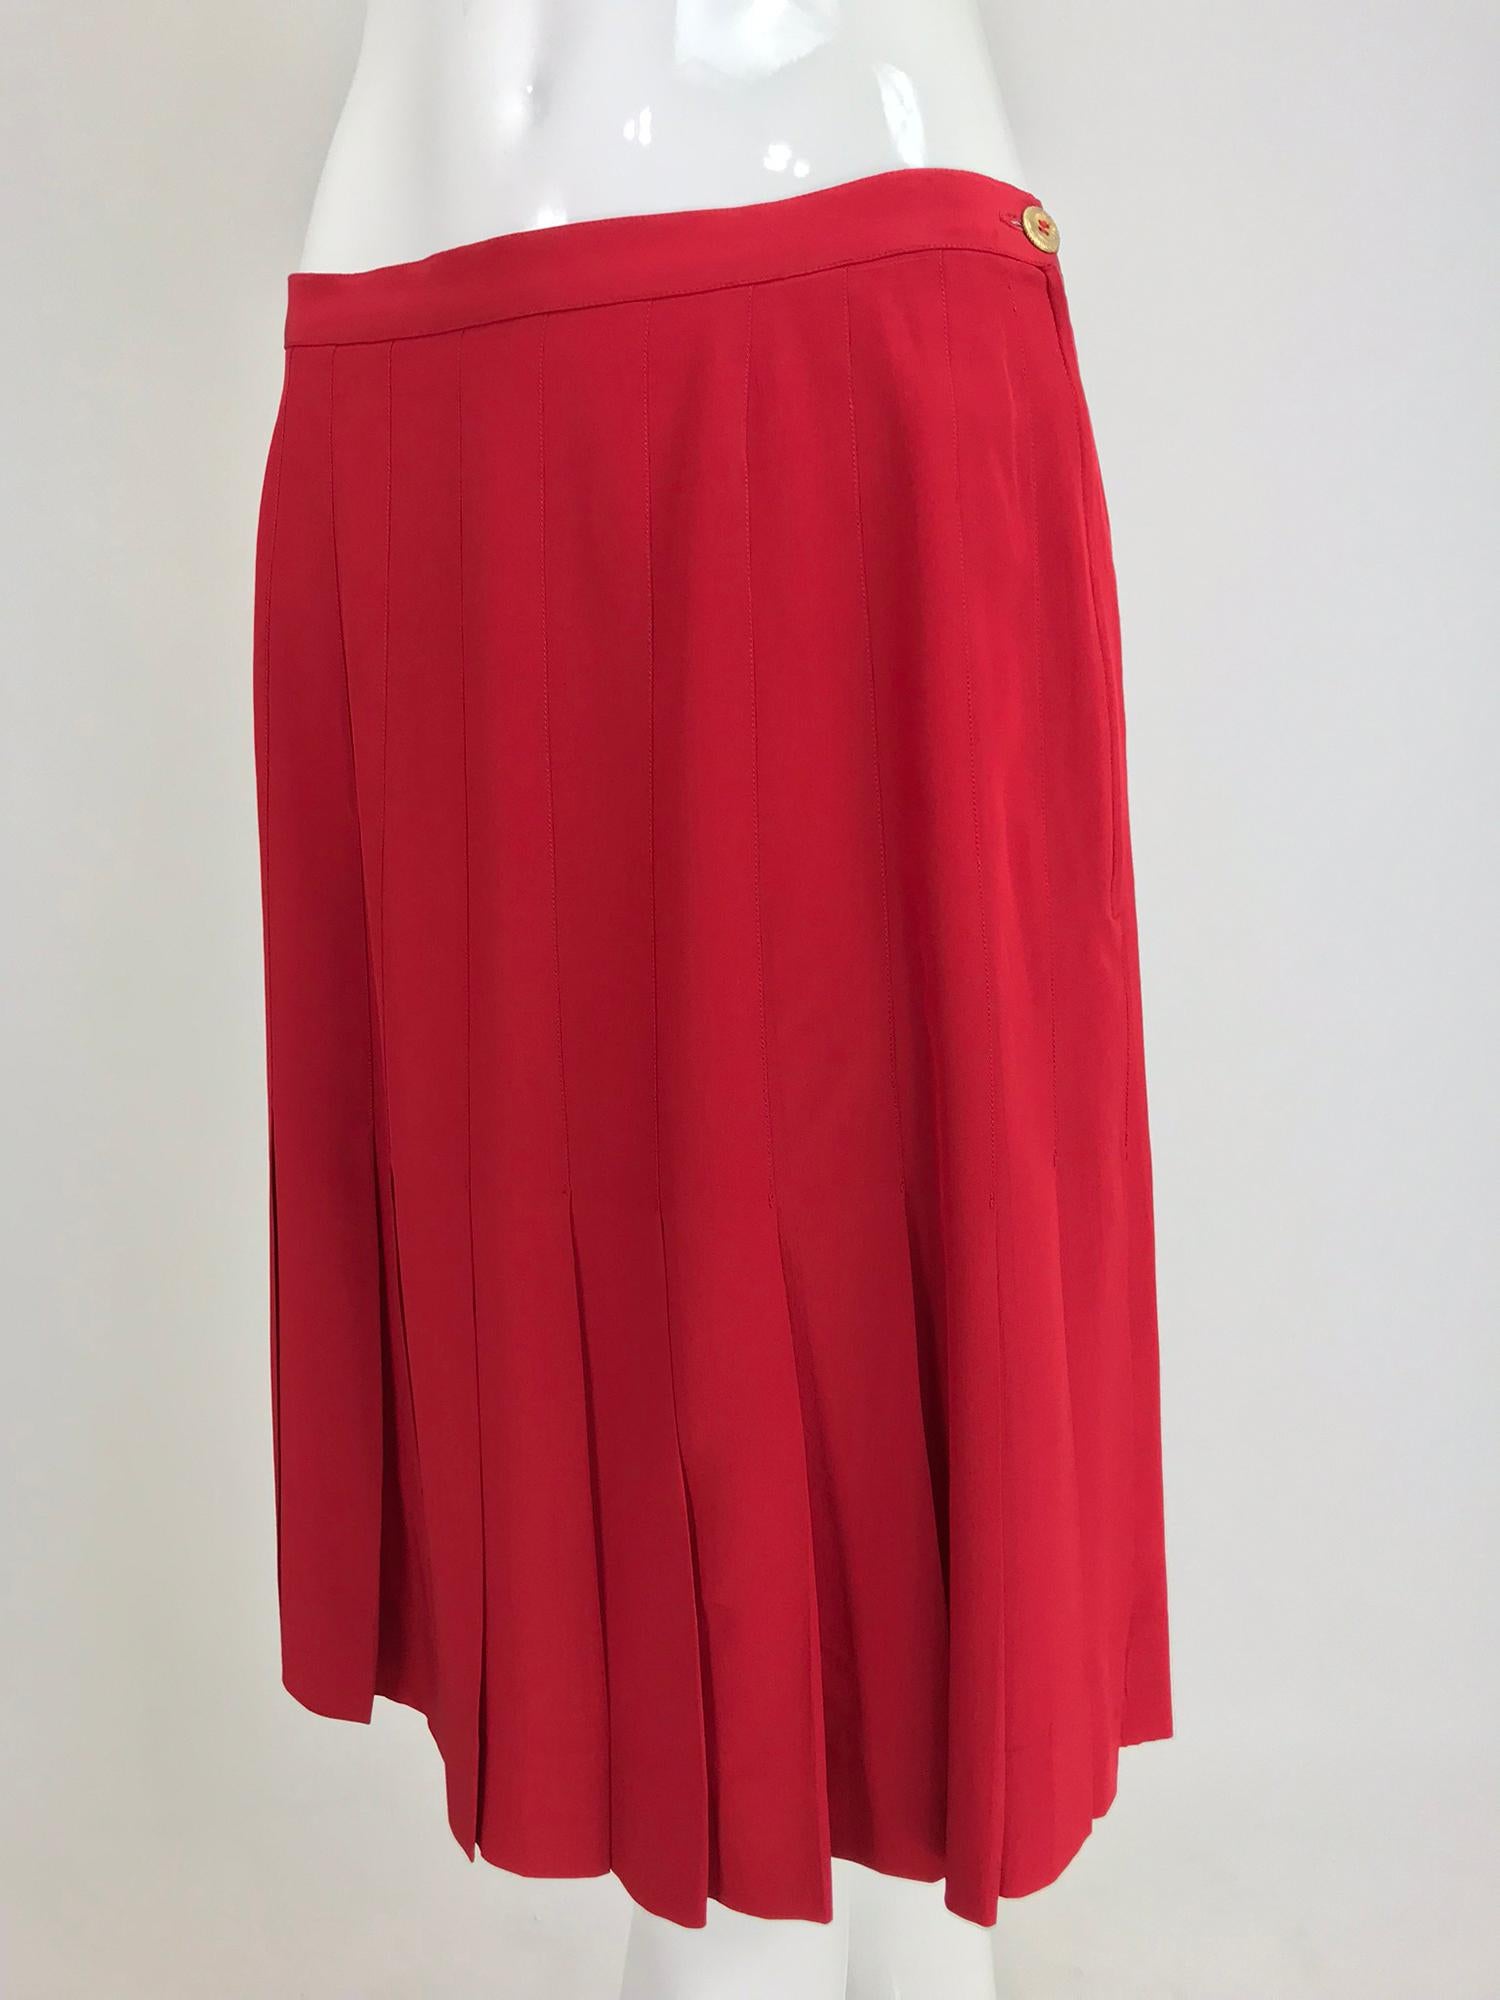 Chanel Red silk stitch down pleated skirt from the 1990s. Classic go with skirt in a candy apple red shade. Fully lined in red silk. Closes at the side with a gold button and zipper. Fits a size S-M. 

In excellent wearable condition... All our